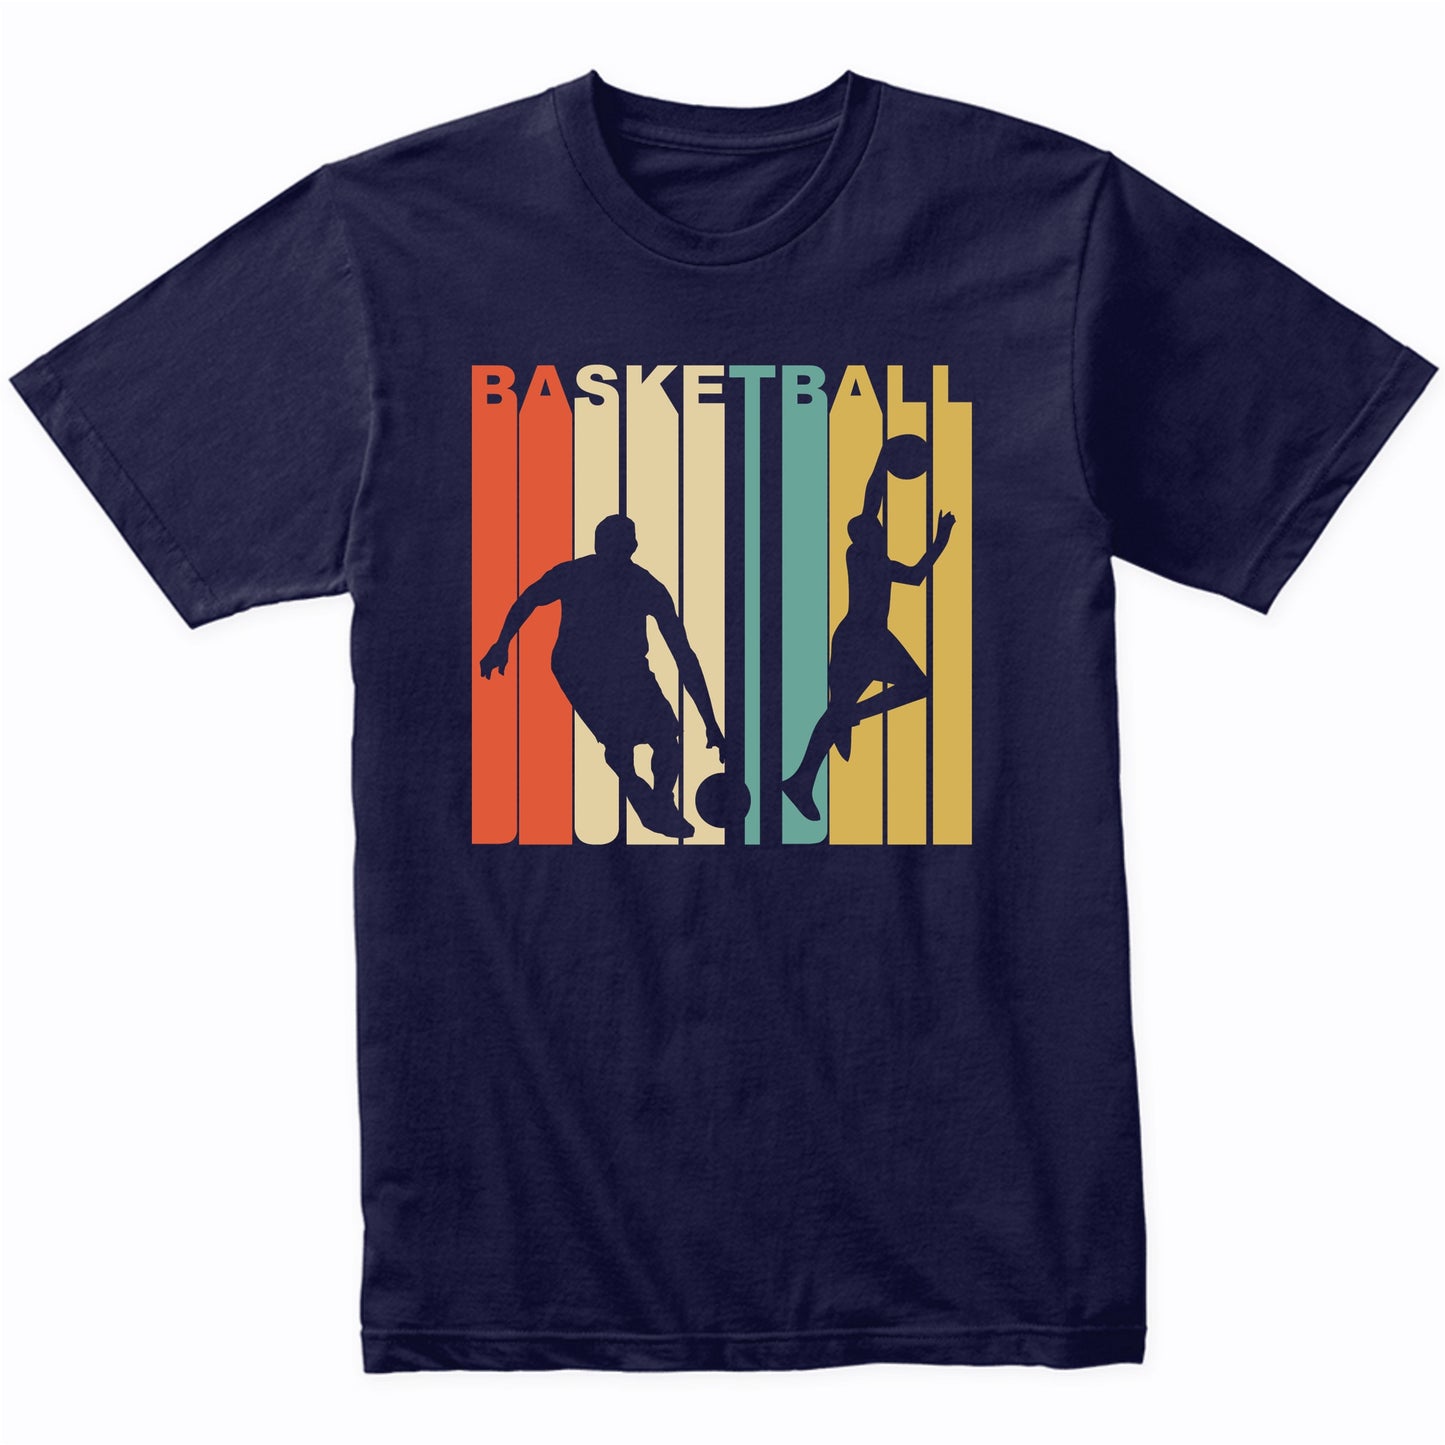 Retro 1970s Style Basketball Players Silhouette Sports Shirt